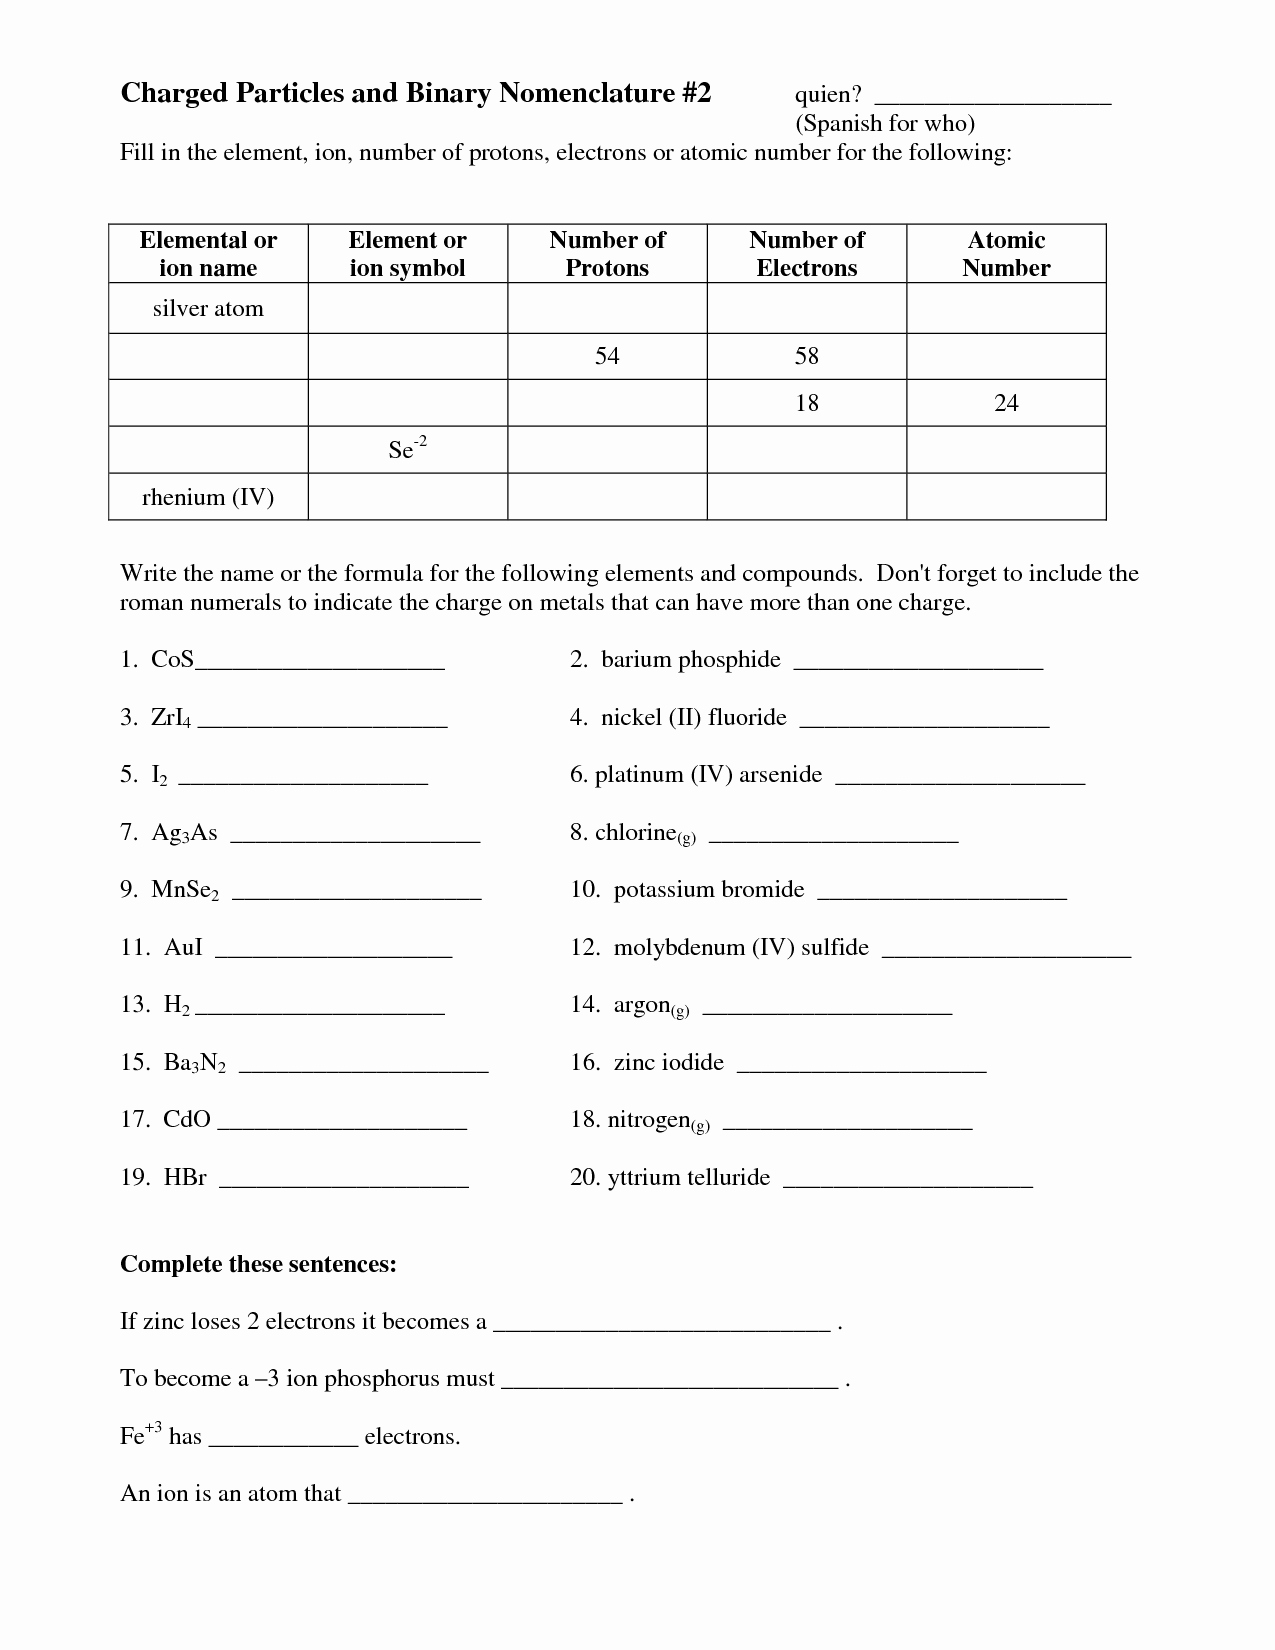 Simple Binary Ionic Compounds Worksheet Fresh Worksheet Naming Ionic Pounds with Multivalent Metals